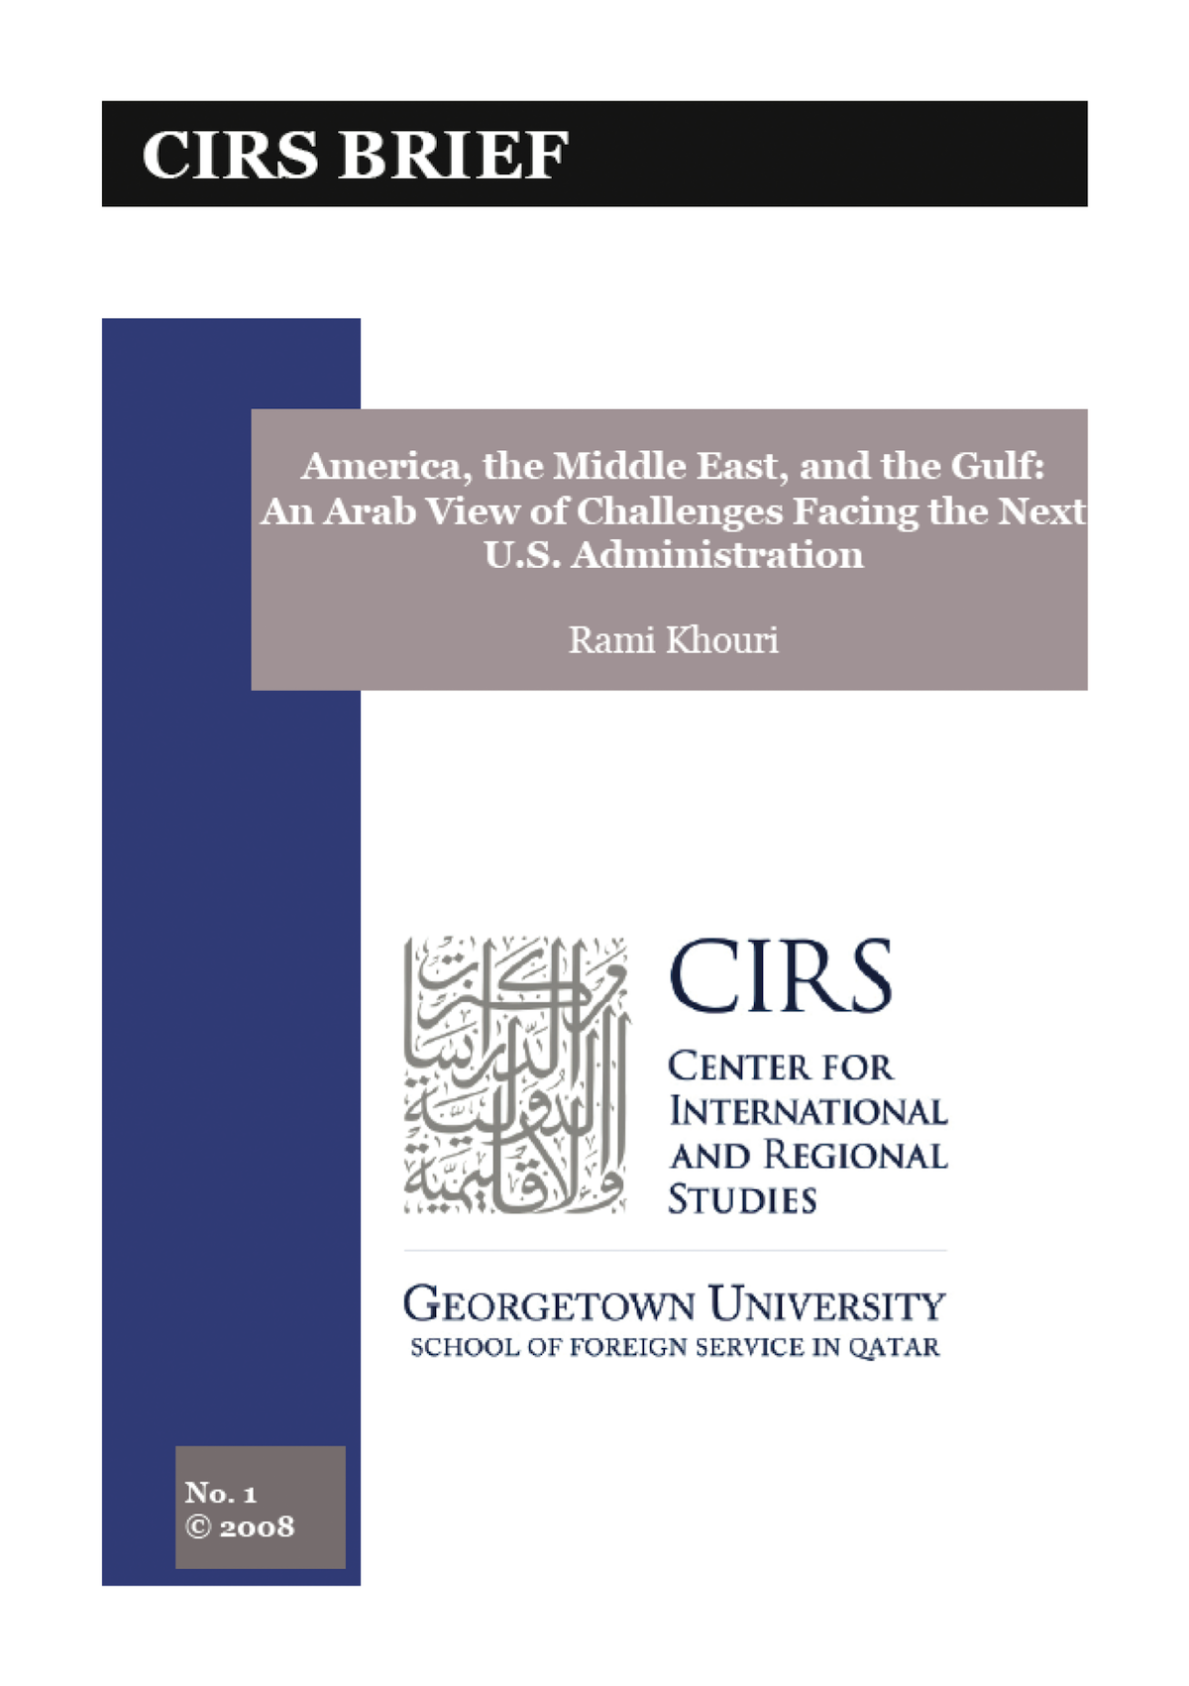 America, the Middle East, and the Gulf: An Arab View of Challenges Facing the Next U.S. Administration